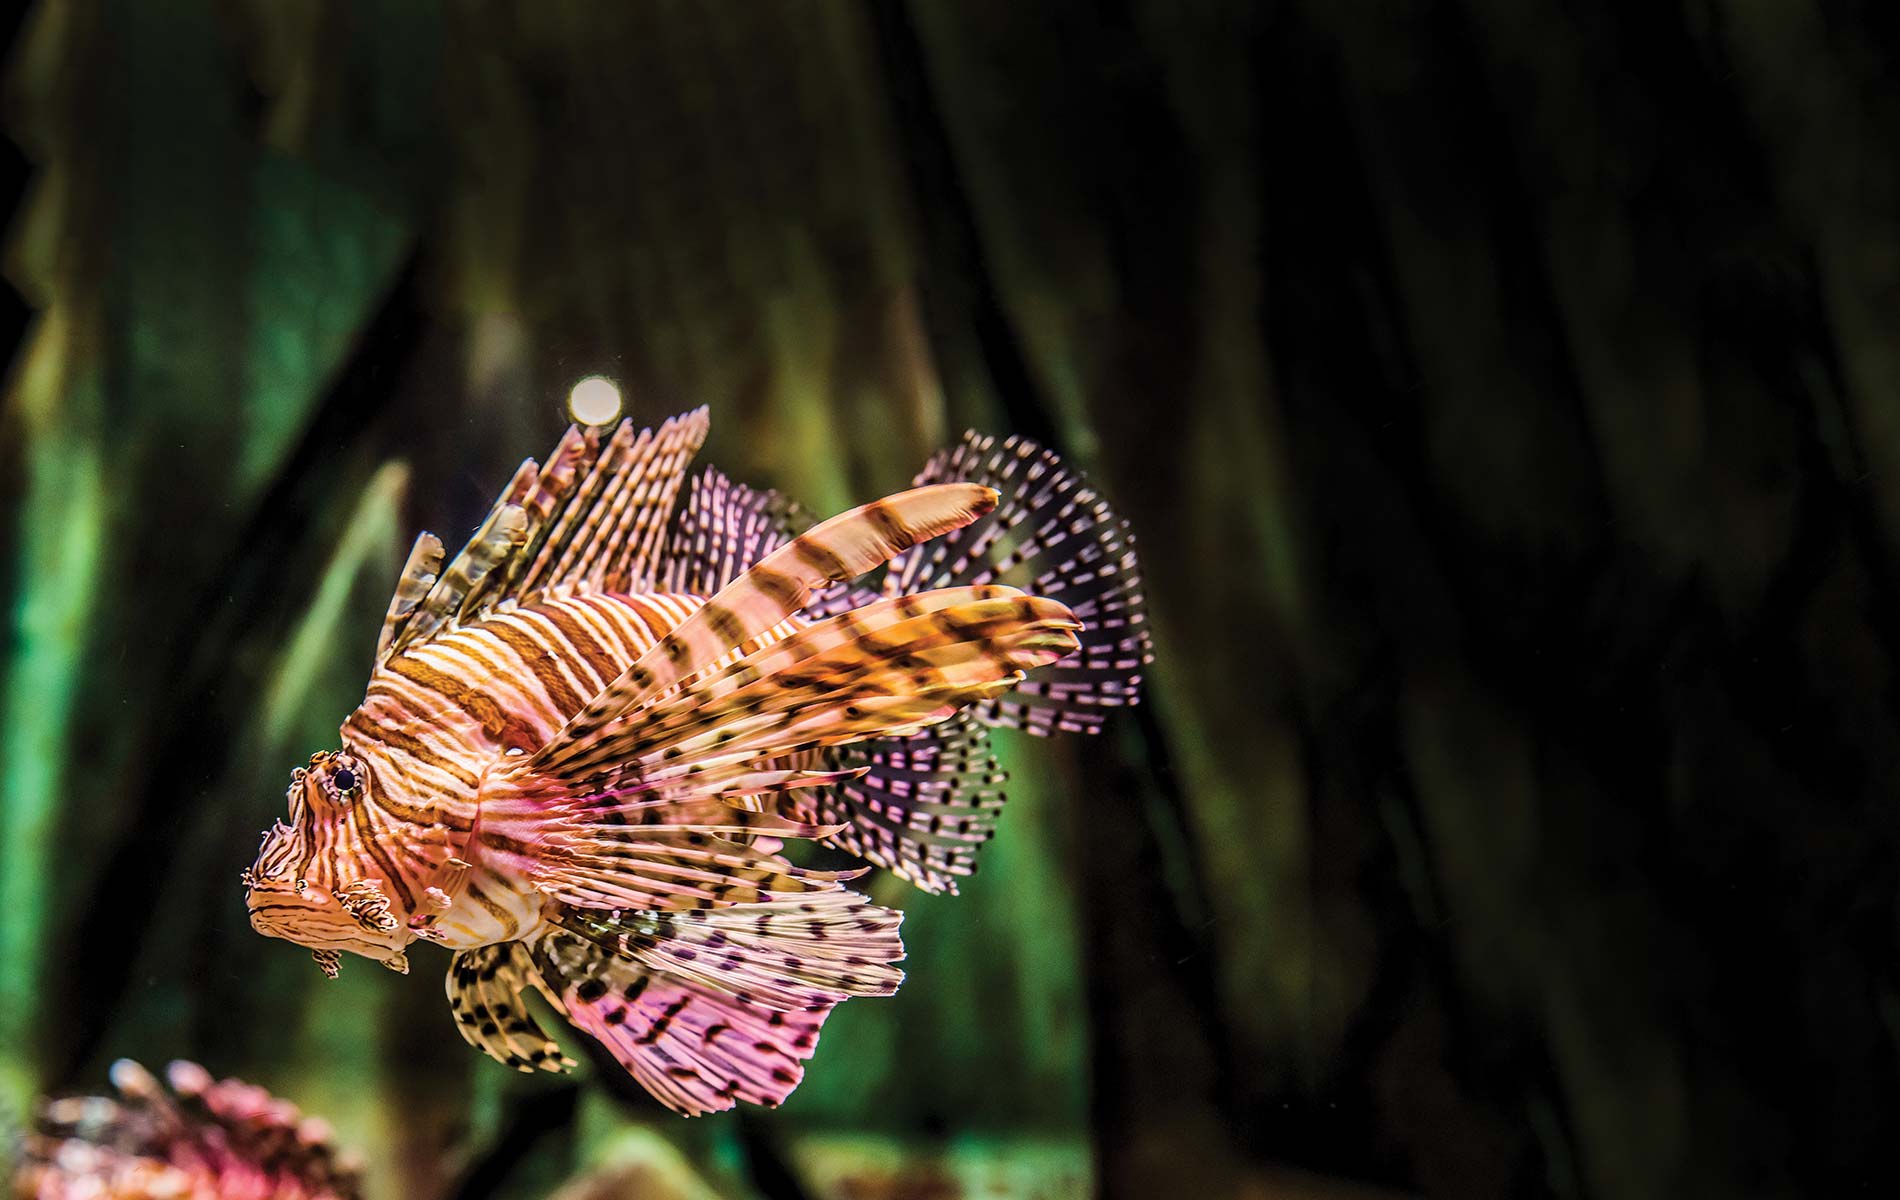 The Lovely, Exotic Lionfish